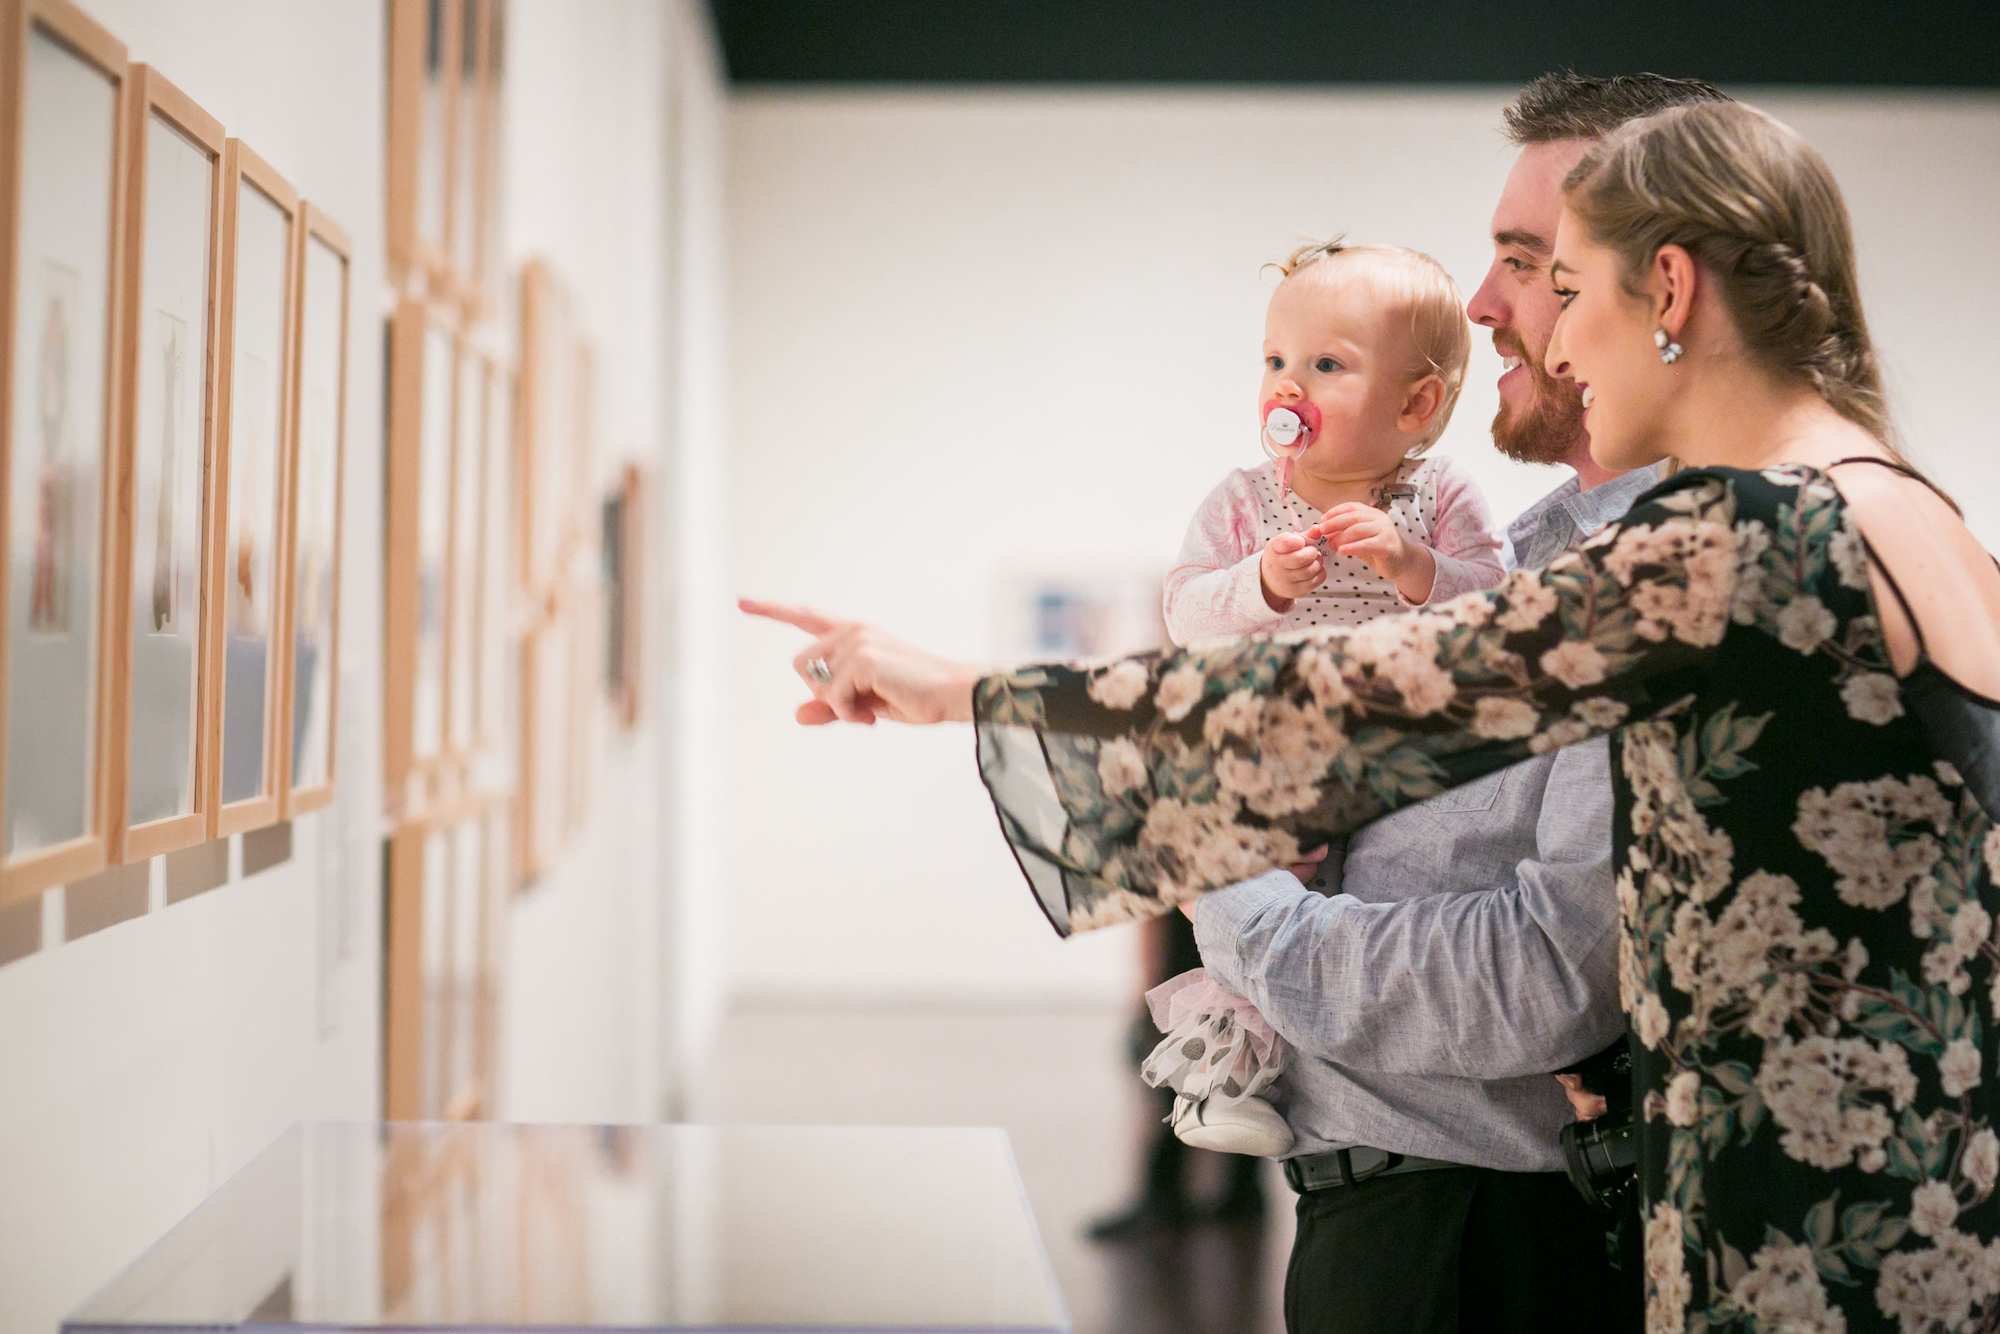 A couple holding a baby, looking at and pointing toward works of art in a gallery